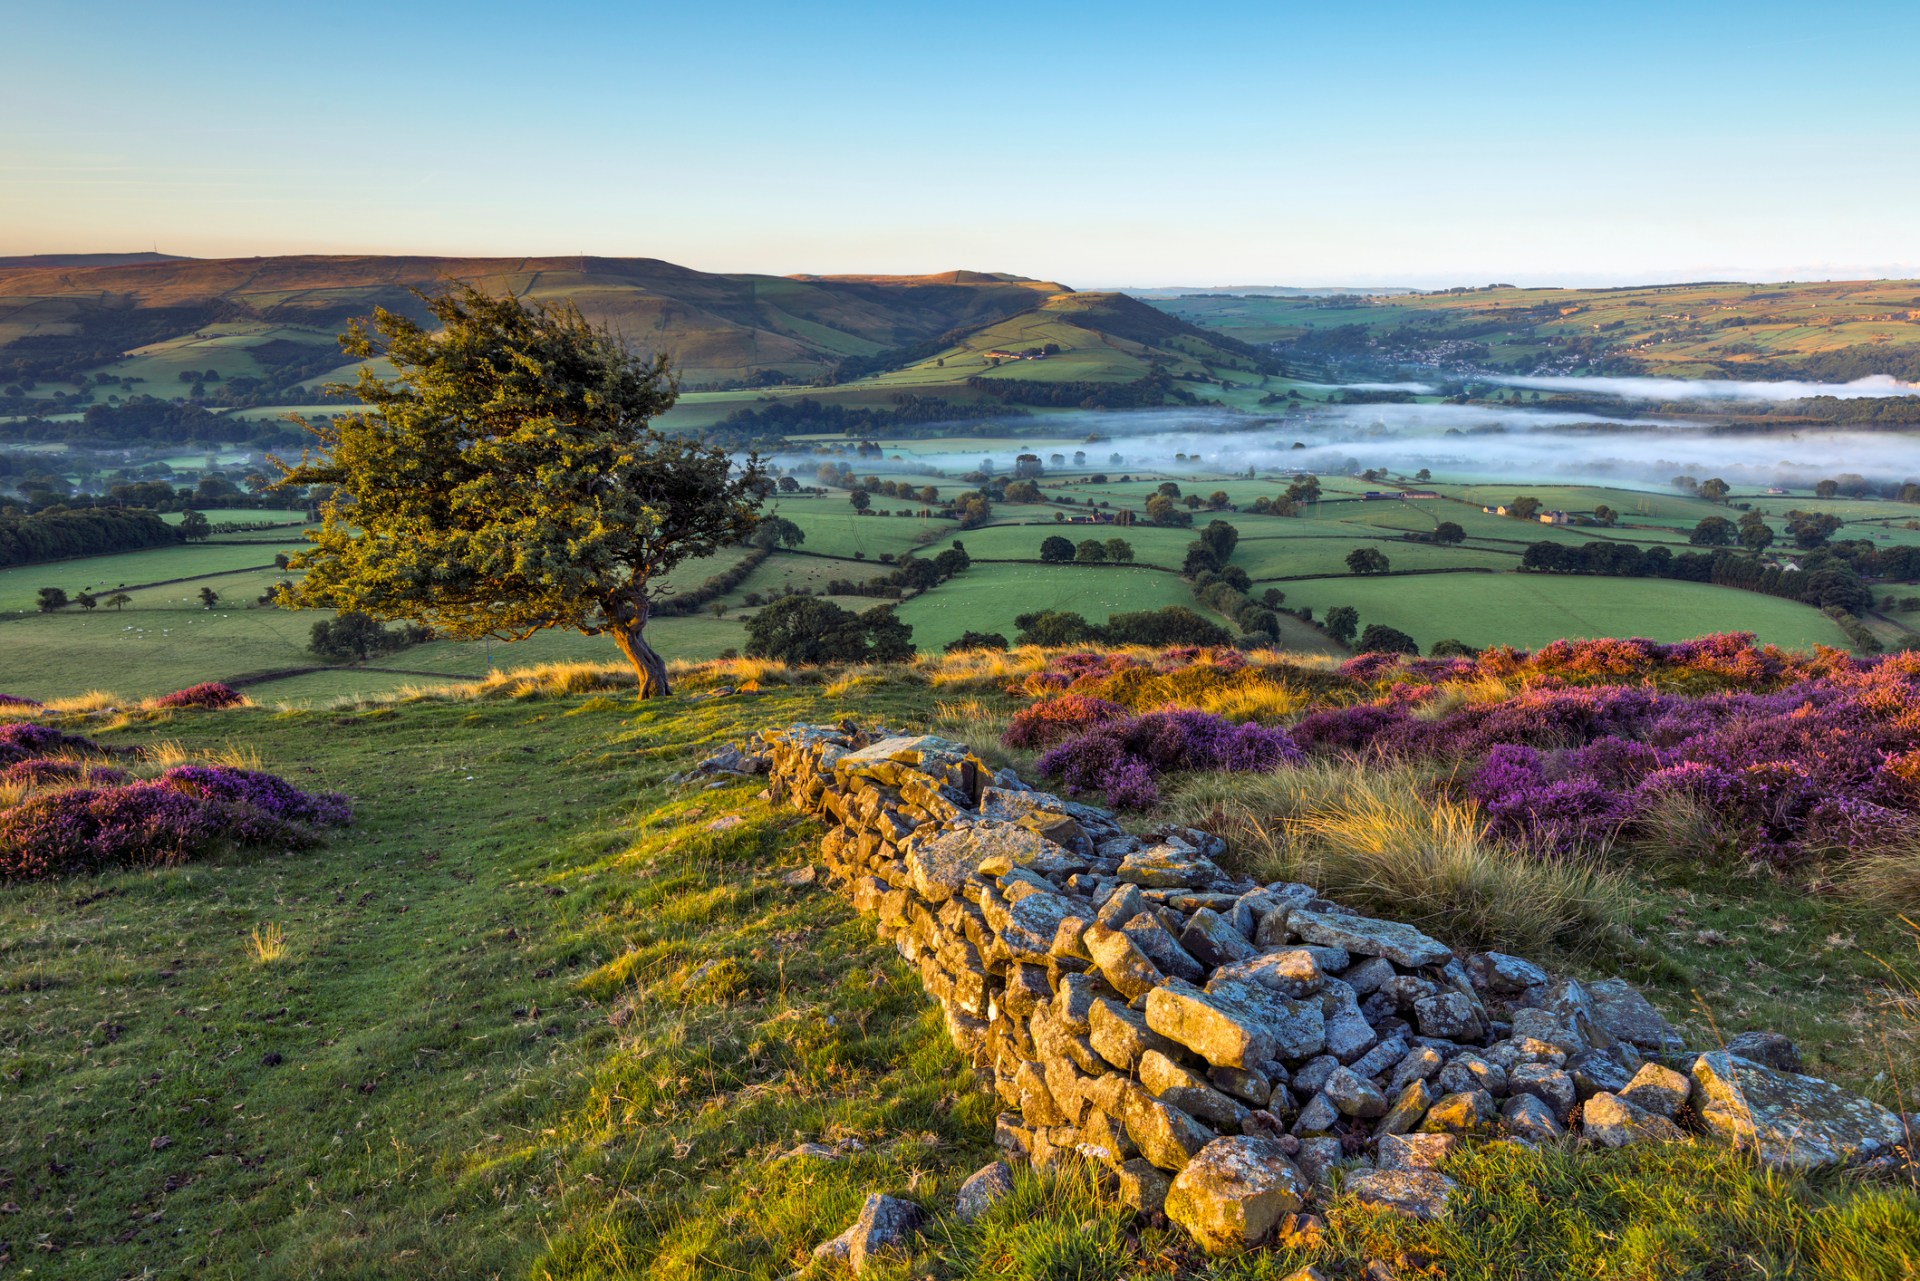 escape london with a trip to the uk's 'best' national park with 'striking' countryside